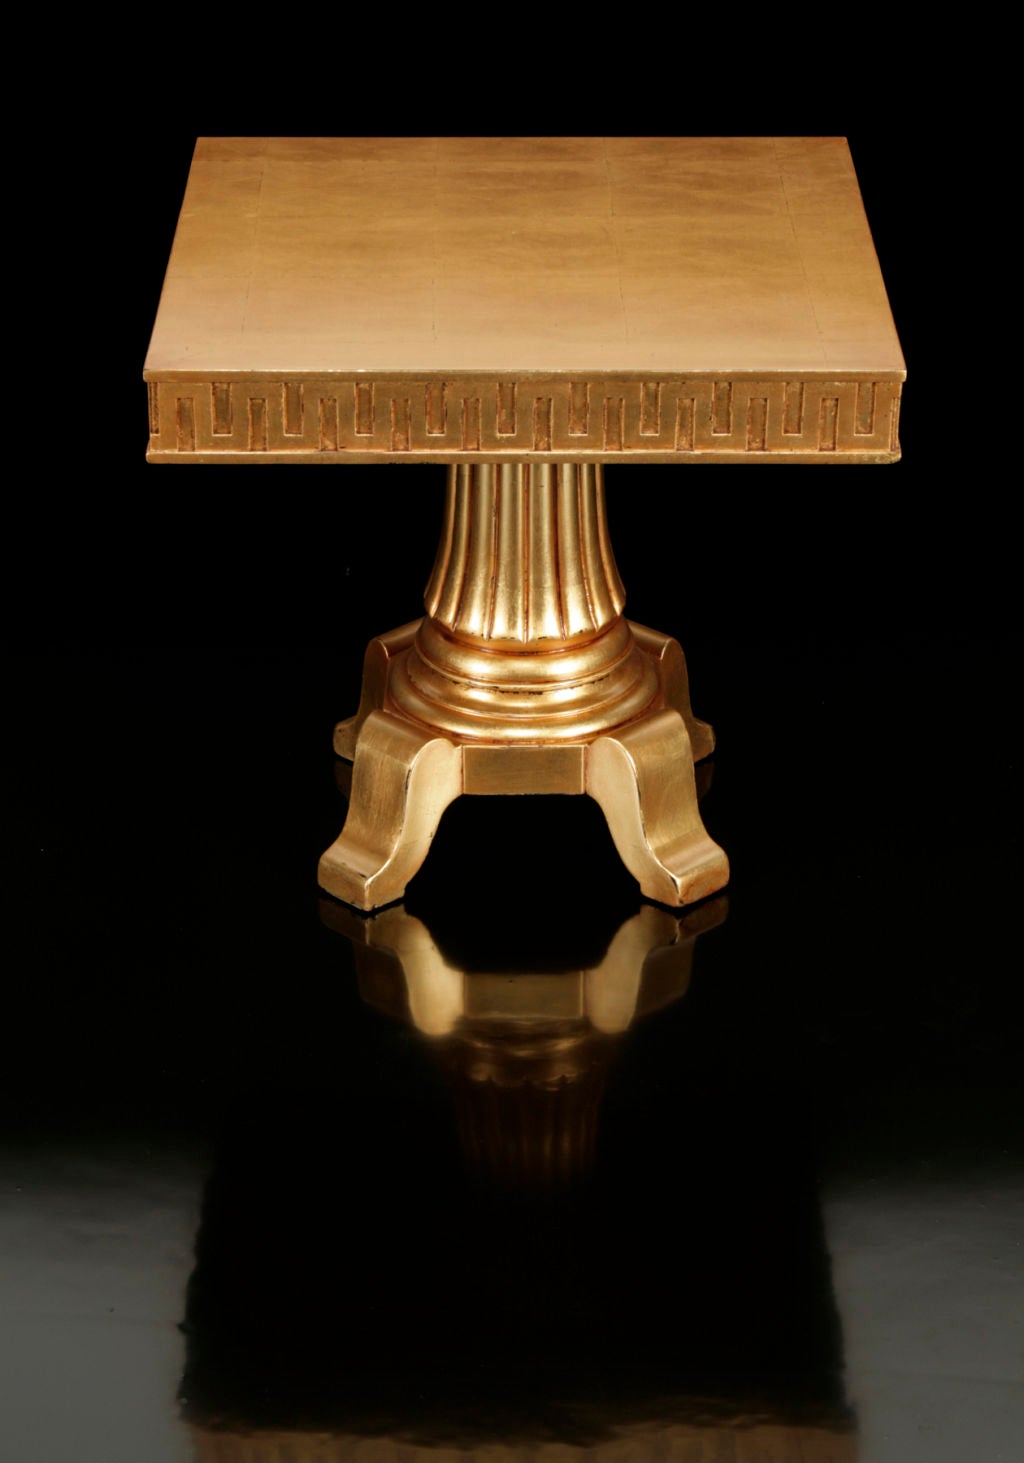 Gilt low table by James Mont.

Square top decorated with chinoiserie fretwork carved apron on a fluted column base, finished in antiqued gold metal leaf as shown in concept drawing. Listed on Mont’s contract specifications provided by Mont to Mr.